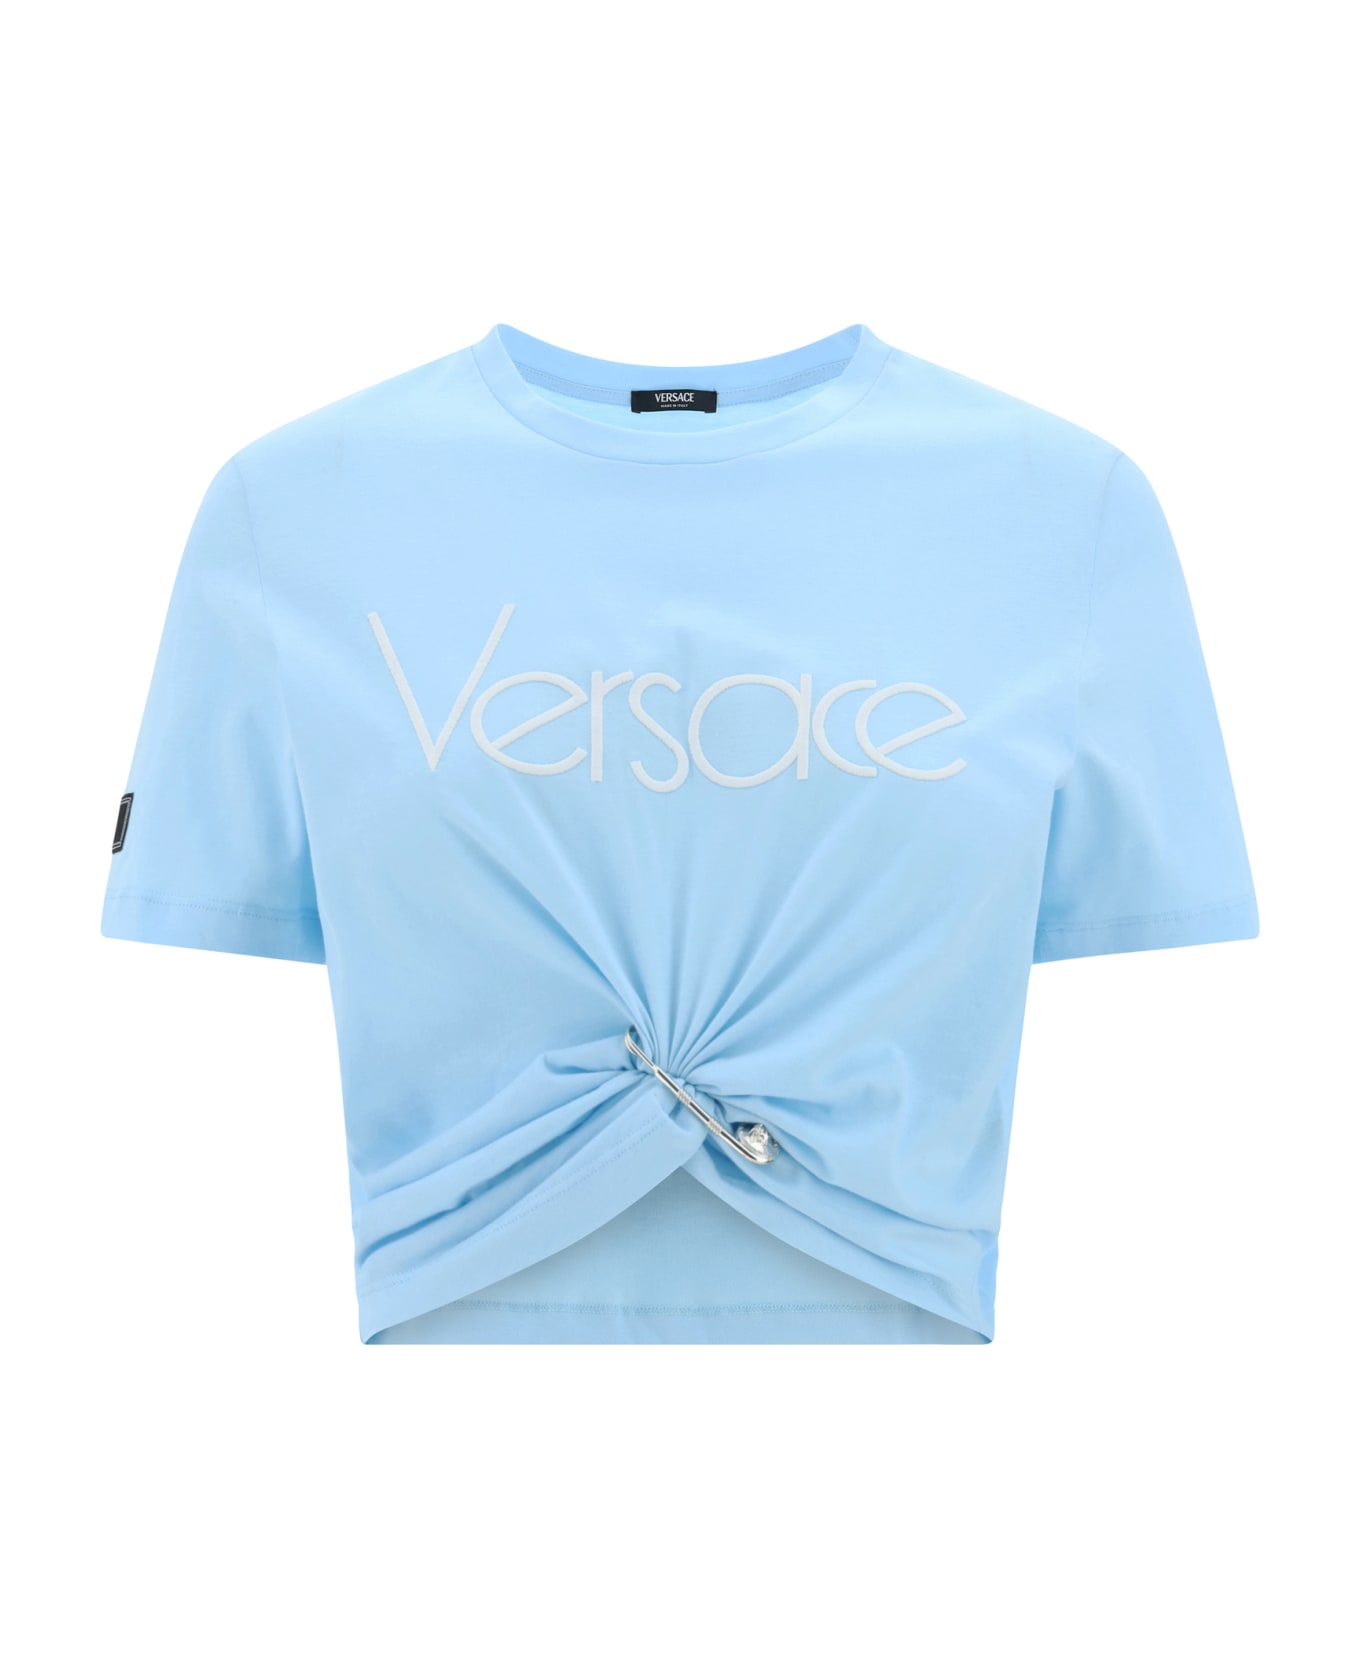 Versace Safety Pin Detail Top - Blue